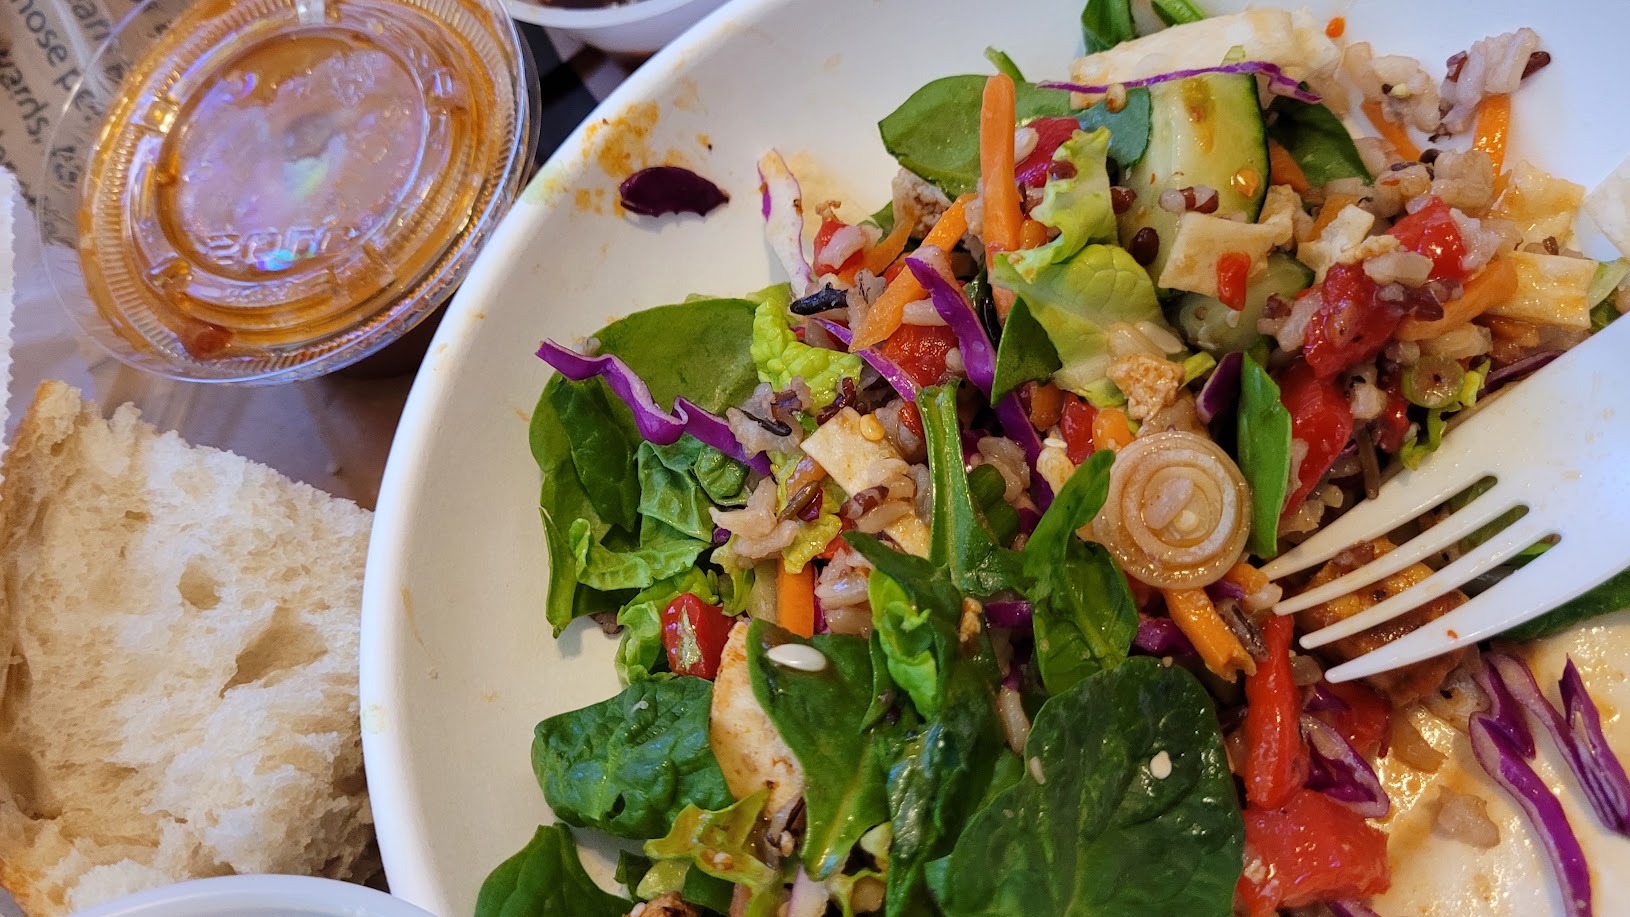 Snappy Salads Greenville